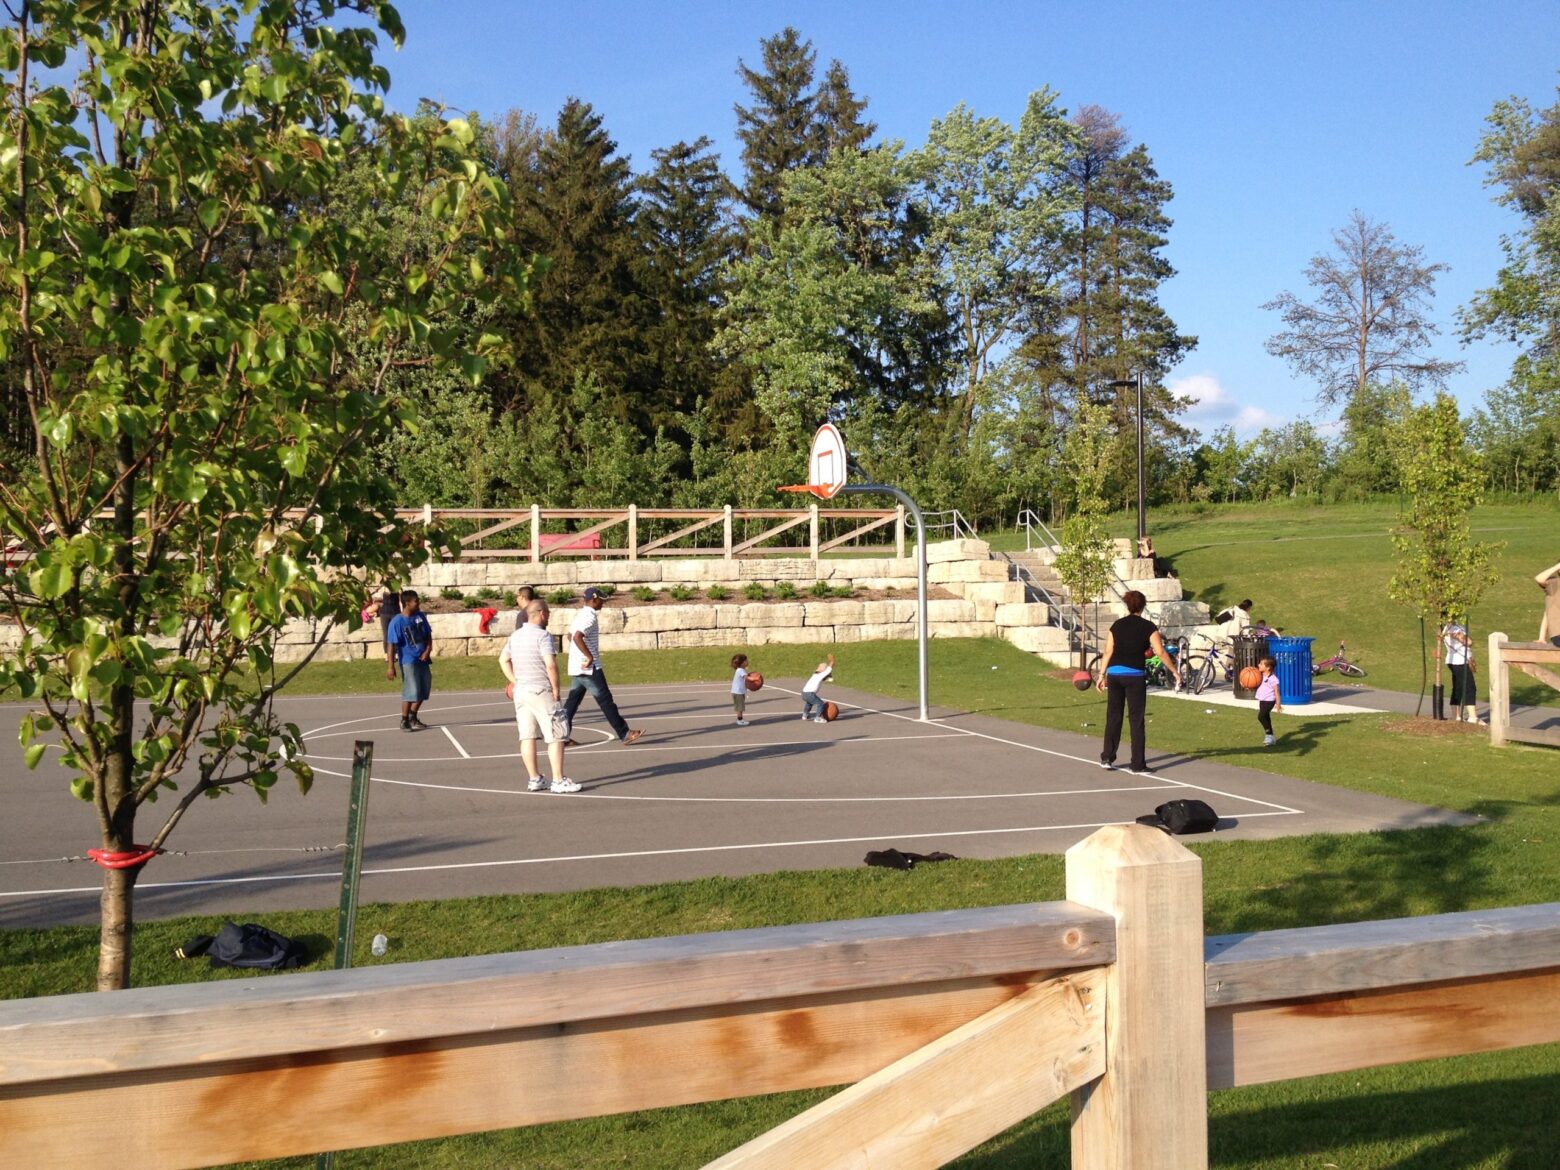 People playing basketball in a court.